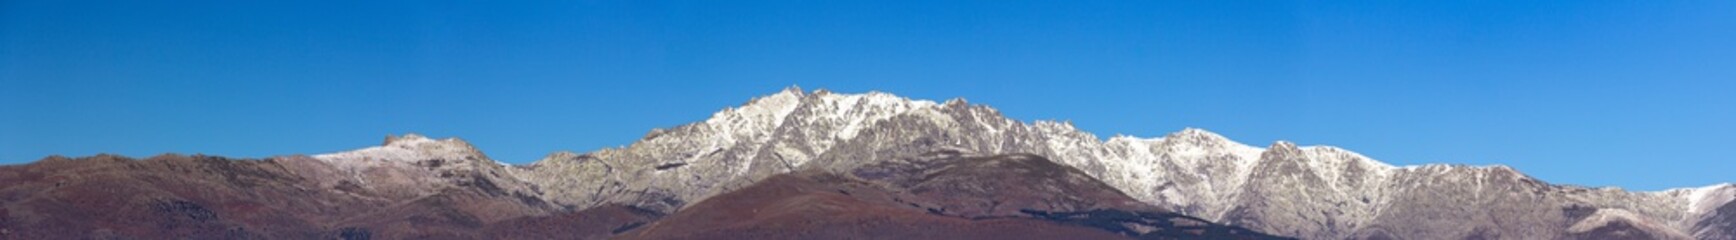 Panoramic view of the profile of the Gredos mountain in Spain with snow on the peaks.